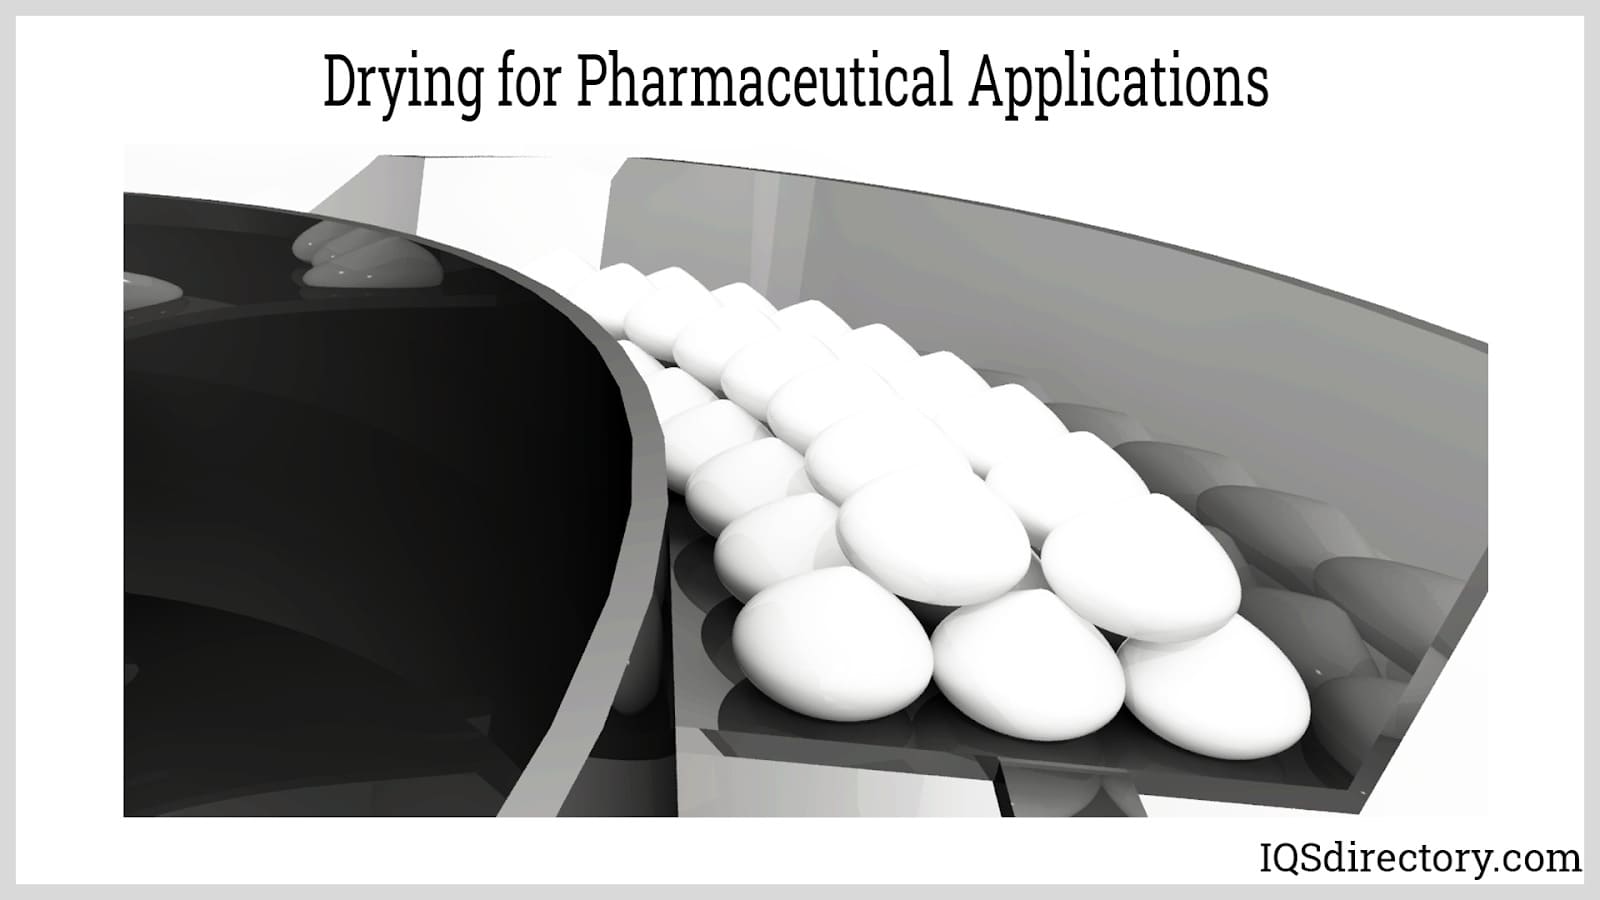 Drying for Pharmaceutical Applications